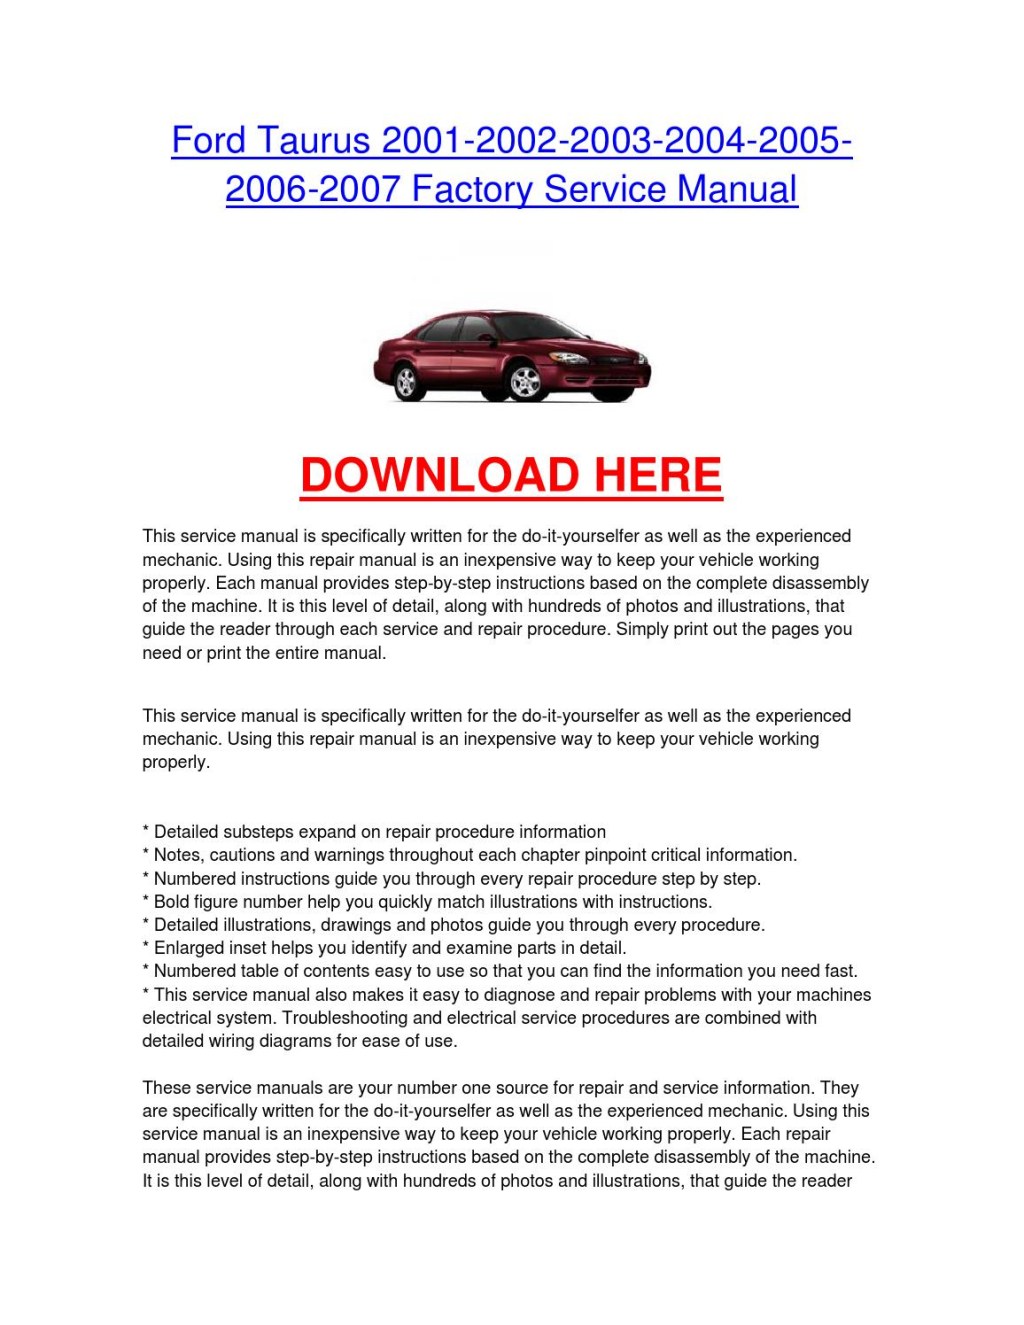 Picture of: Ford taurus        factory service